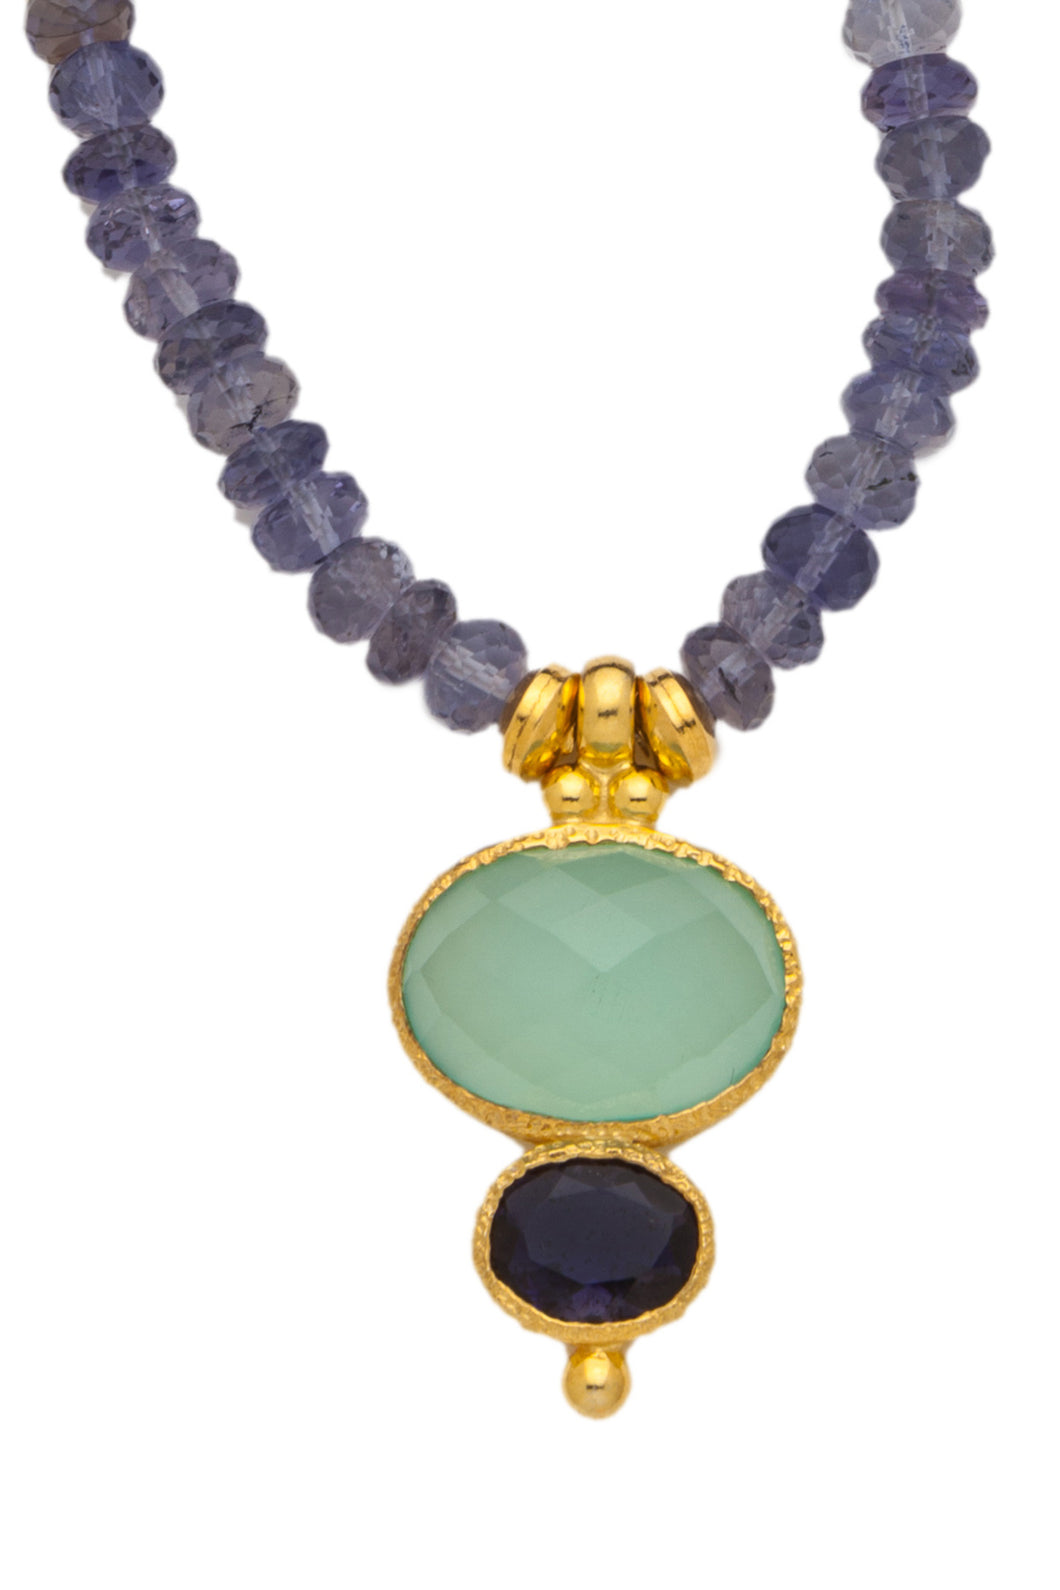 Iolite Necklace with a Chacedony and Iolite Pendant set in 24kt gold vermeil NF079-ICI